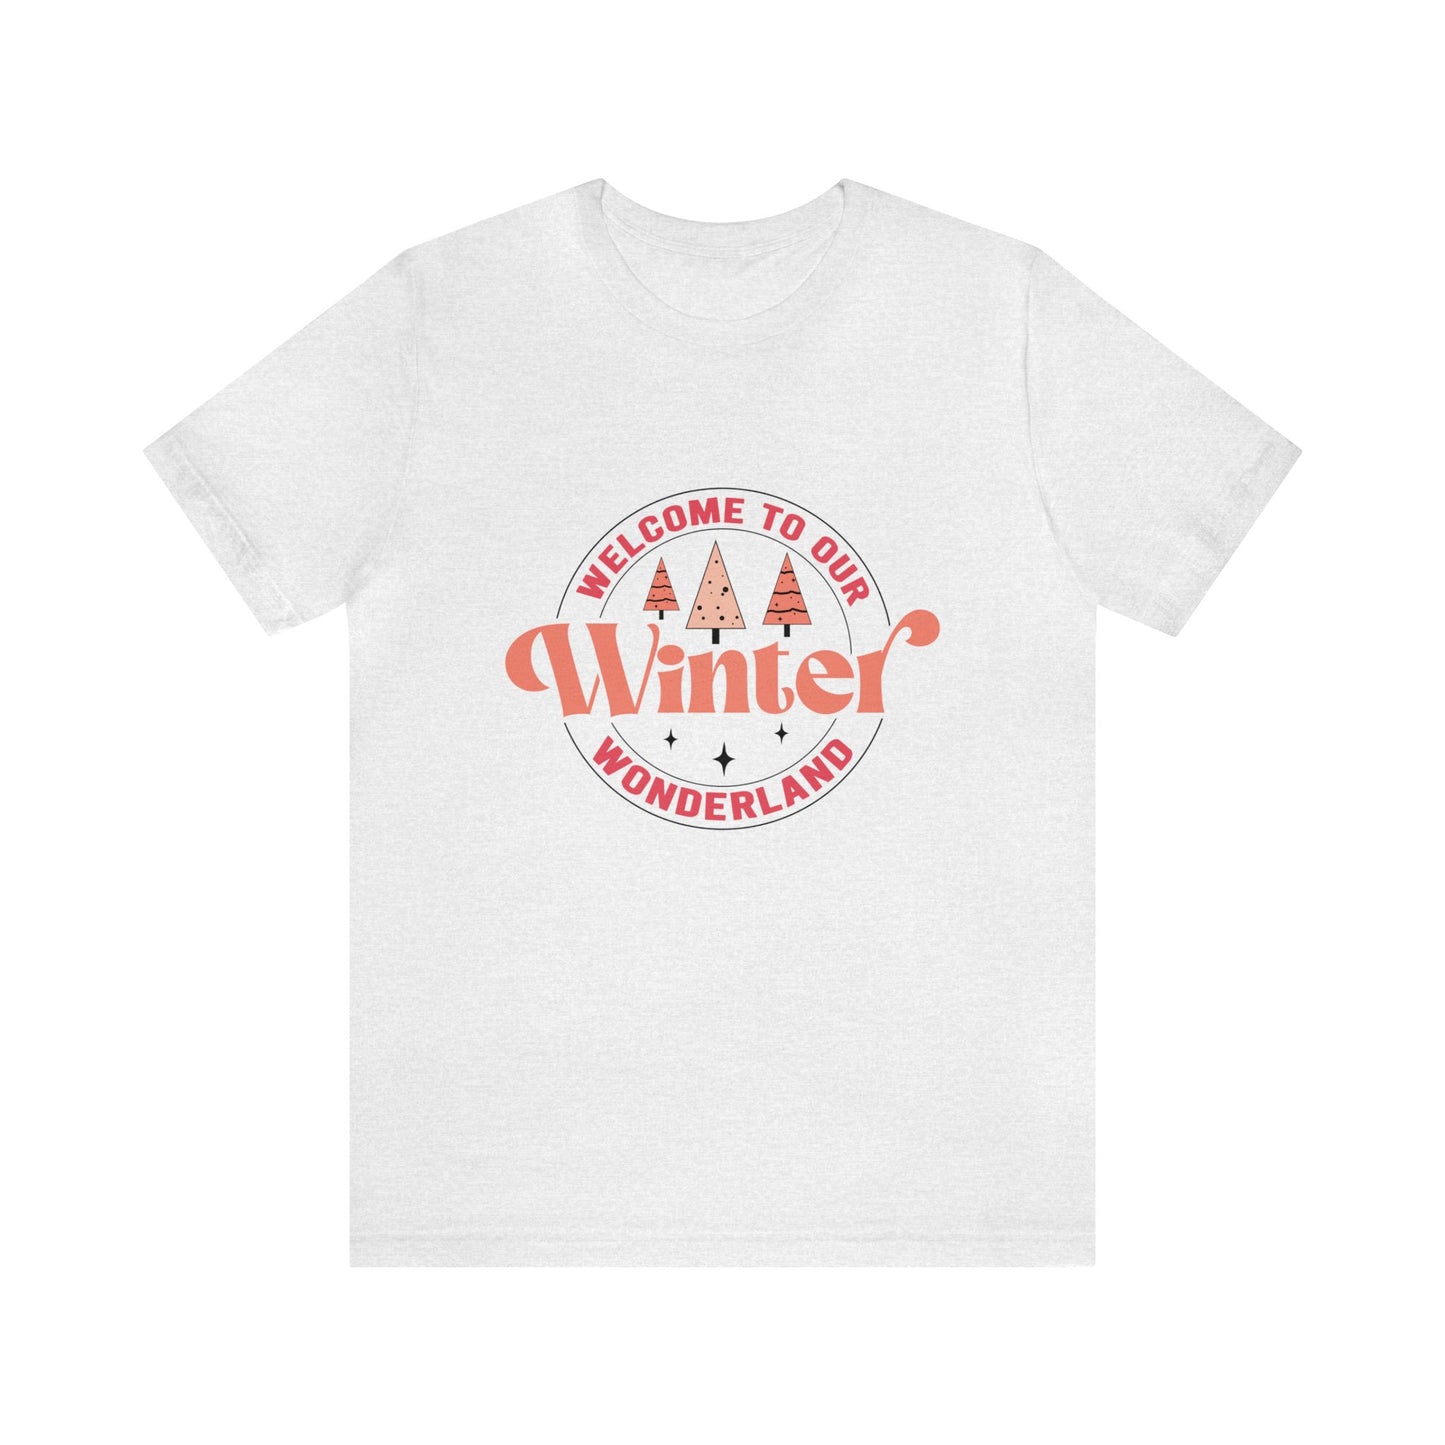 Welcome to our winter wonderland Women's Short Sleeve Christmas T Shirts